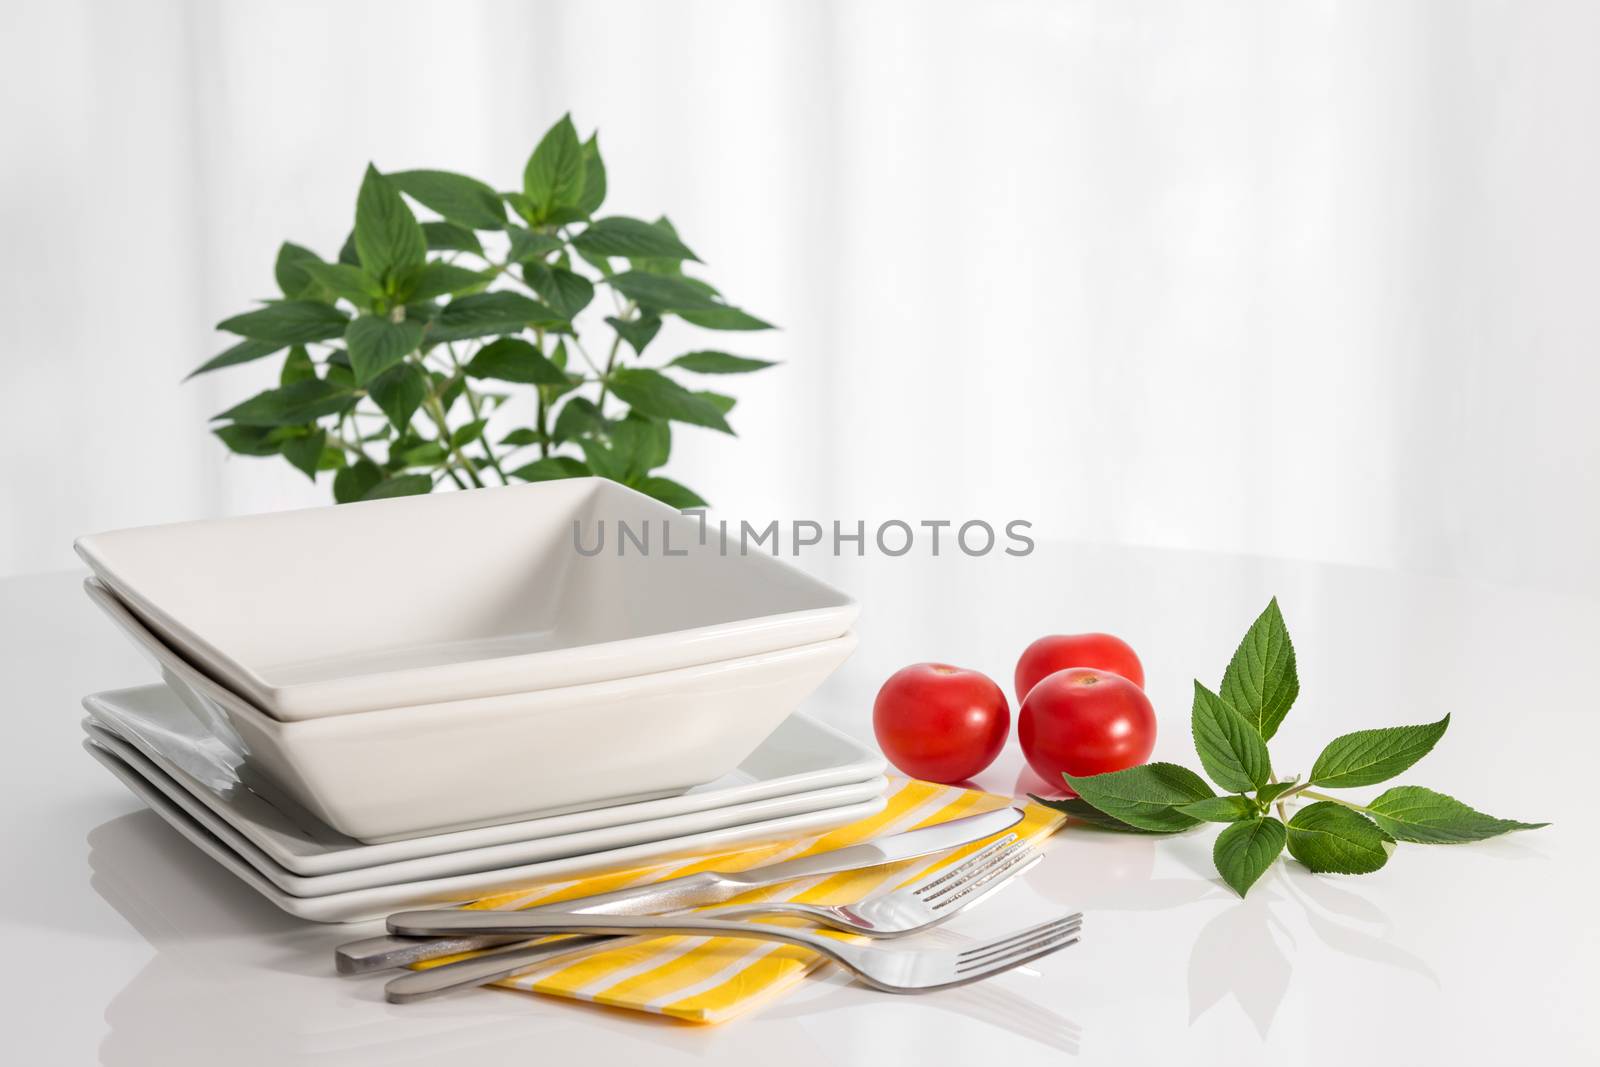 Plates, kitchen utensils, herbs and tomatoes on a white table.